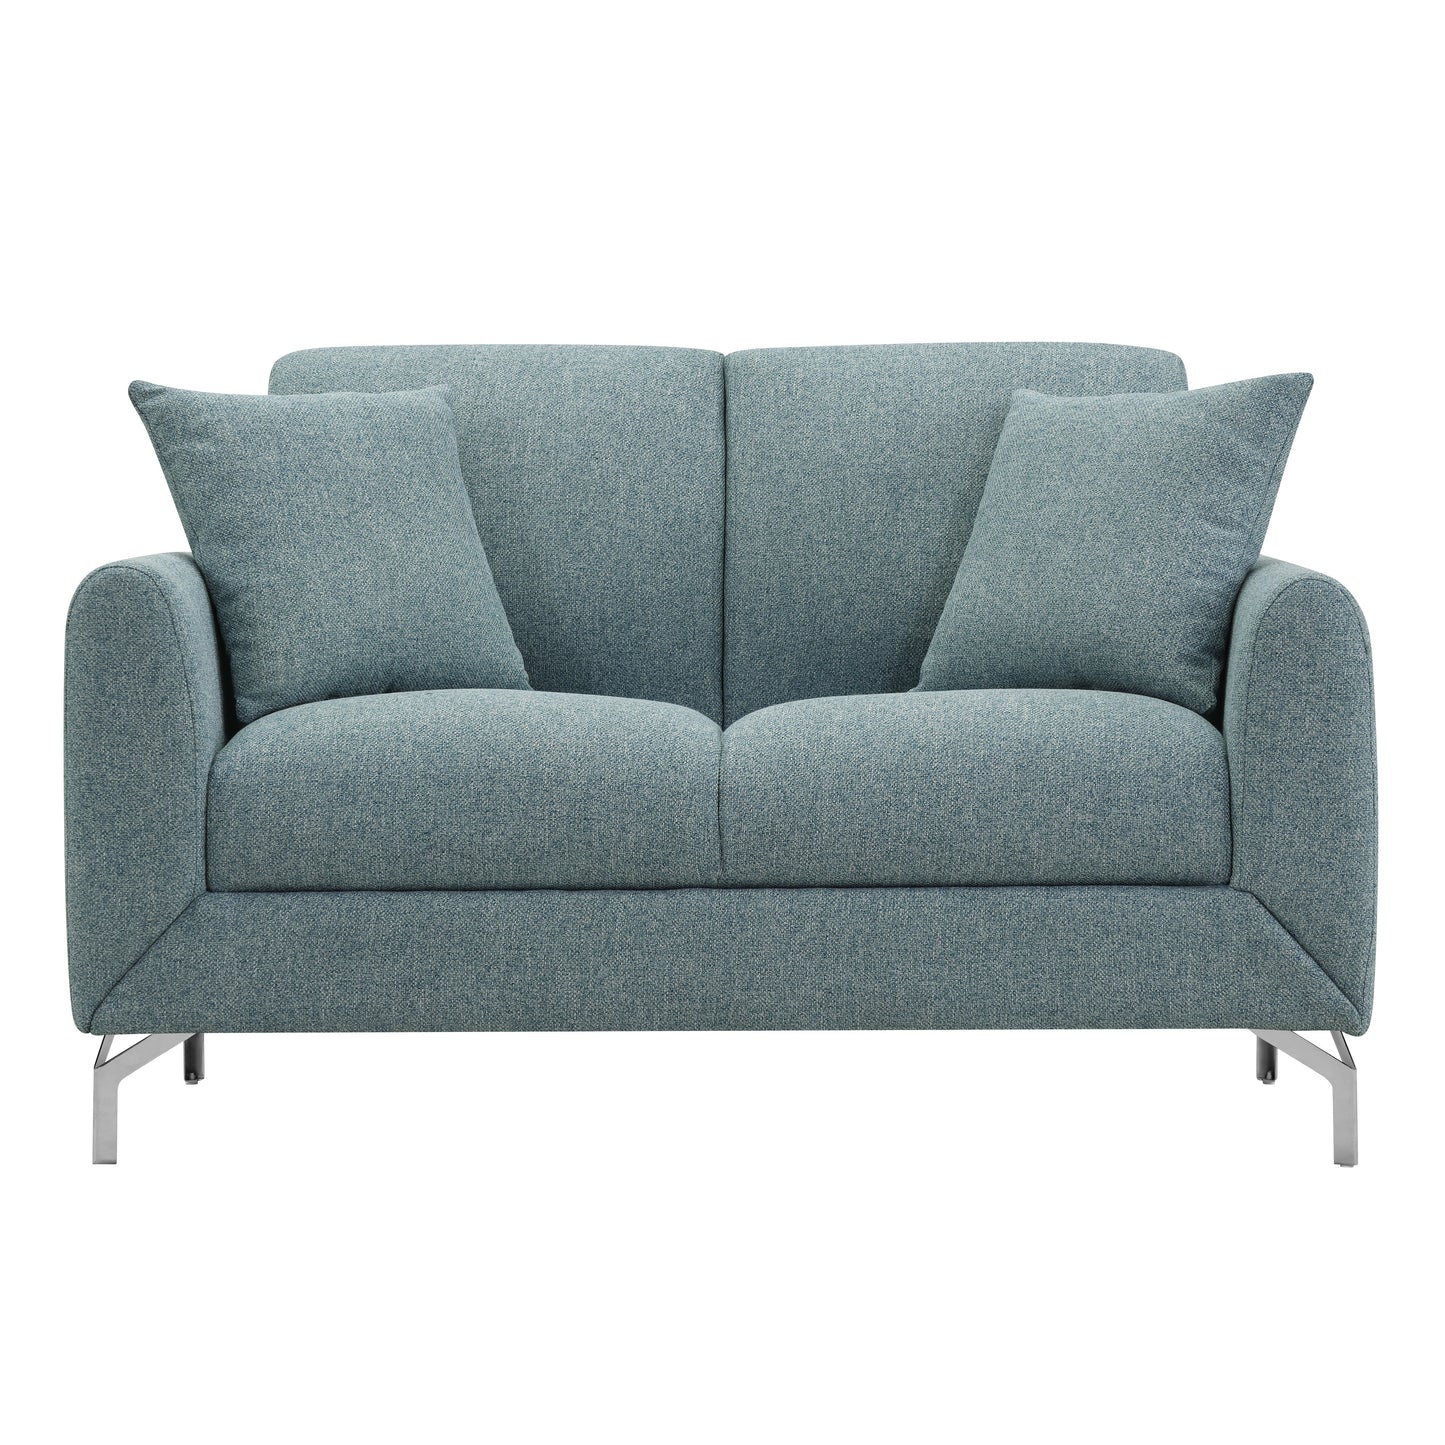 Noreen Contemporary Blue Fabric Rounded Arm Loveseat